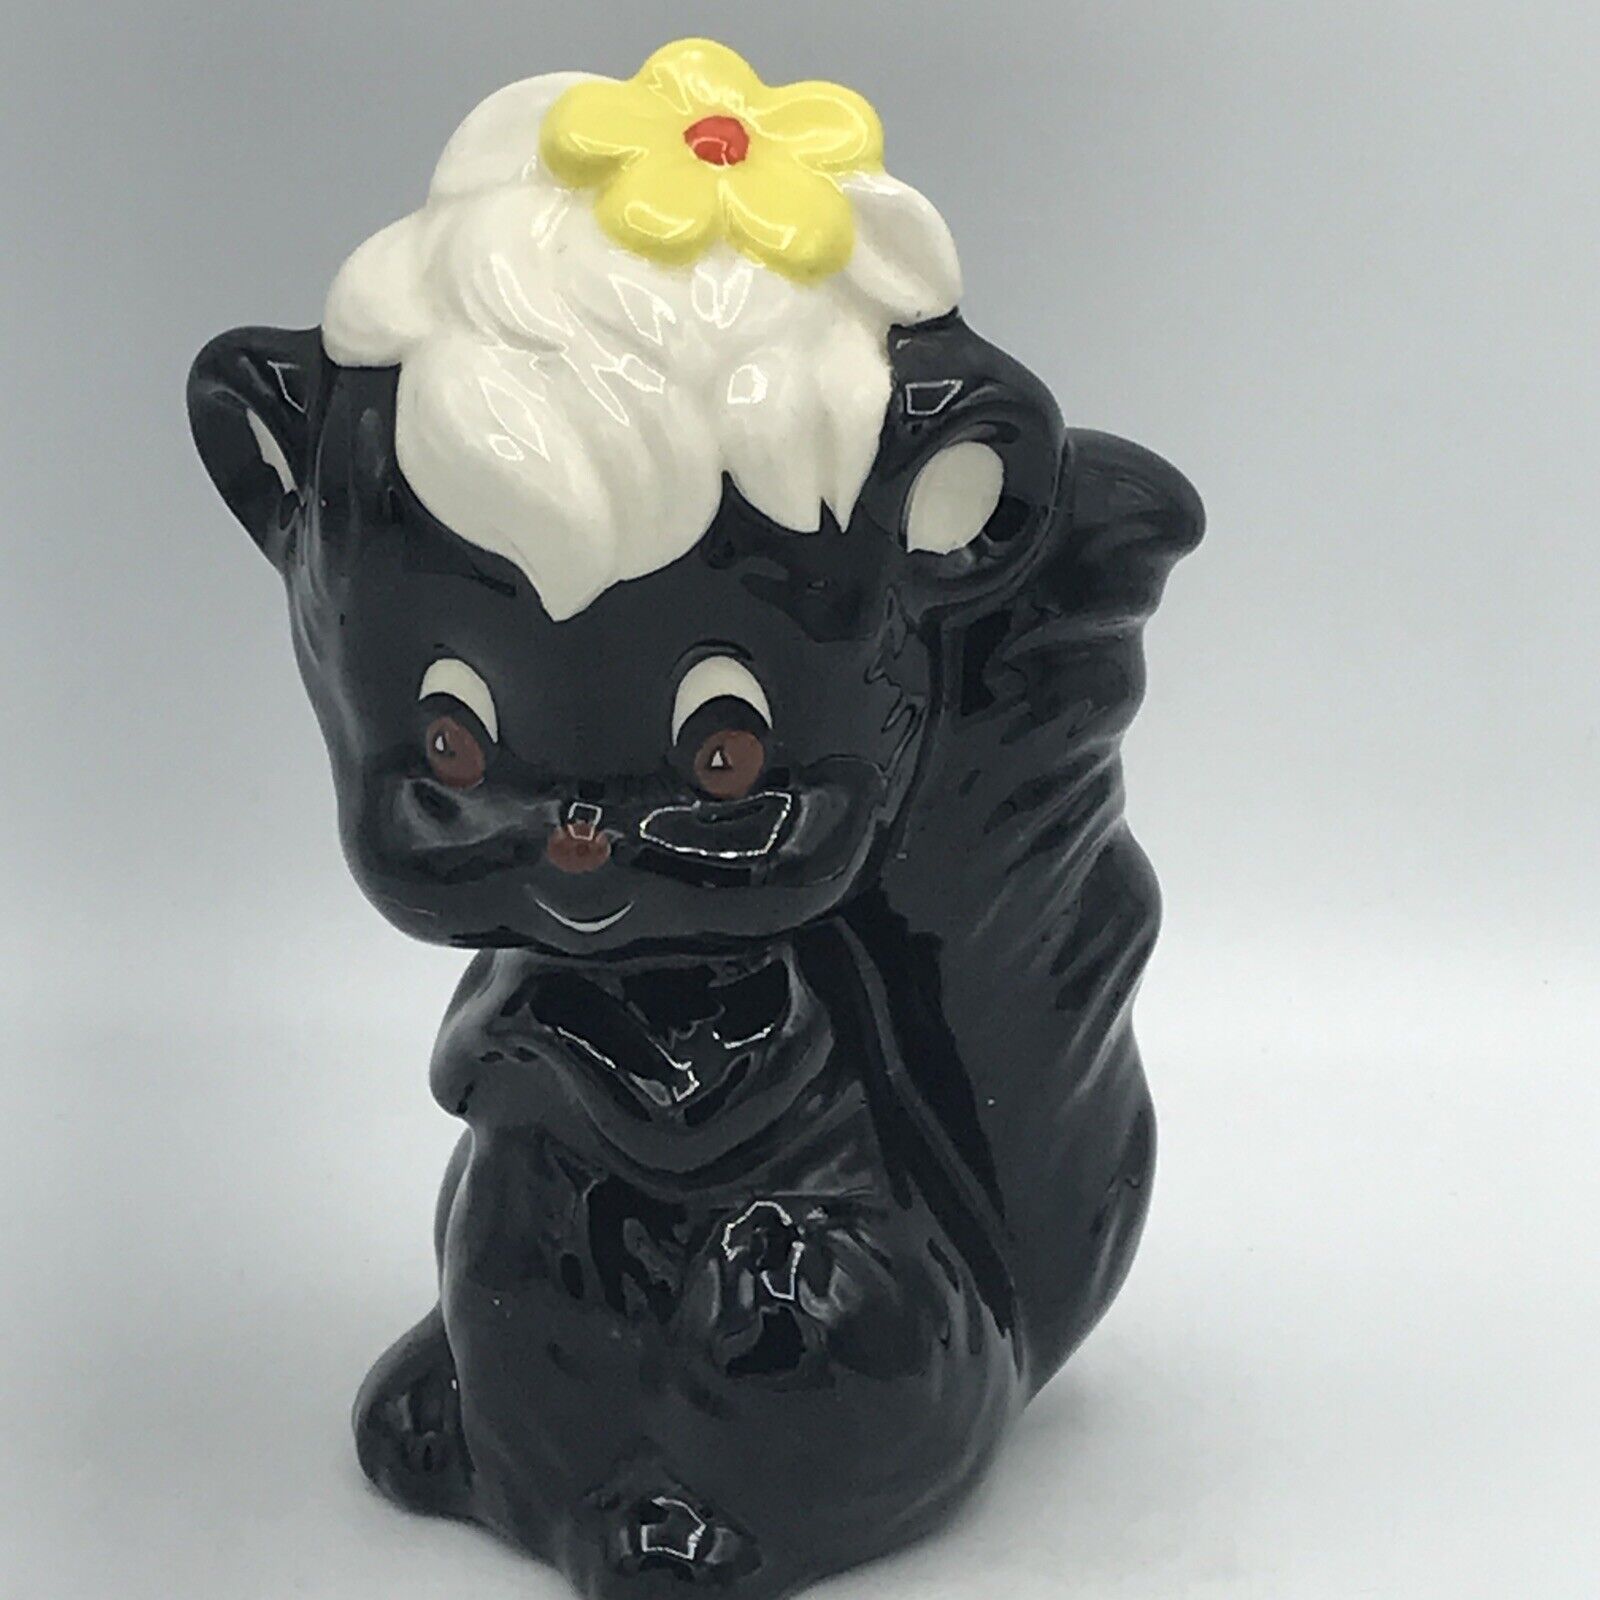 Cute Hand Painted Skunk With Flower On Head 5.75”